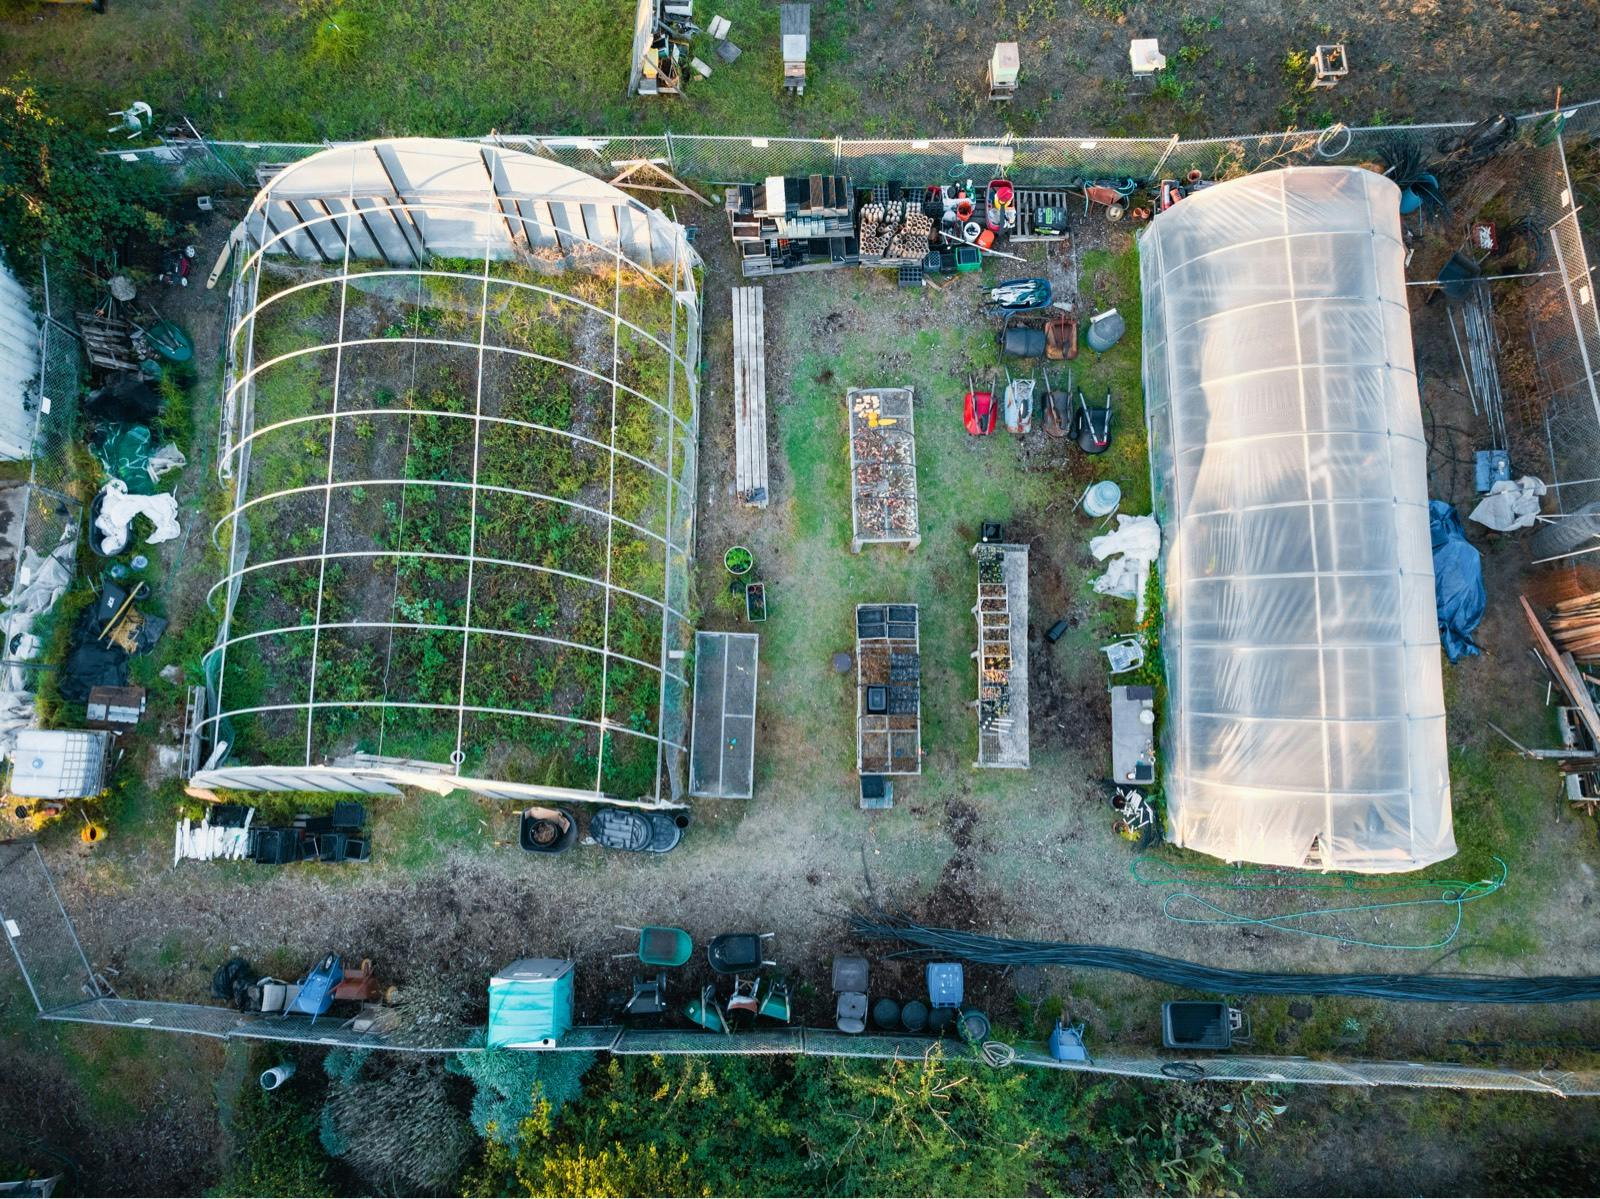 Overhead view of greenhouses at the Santa Cruz homeless garden project